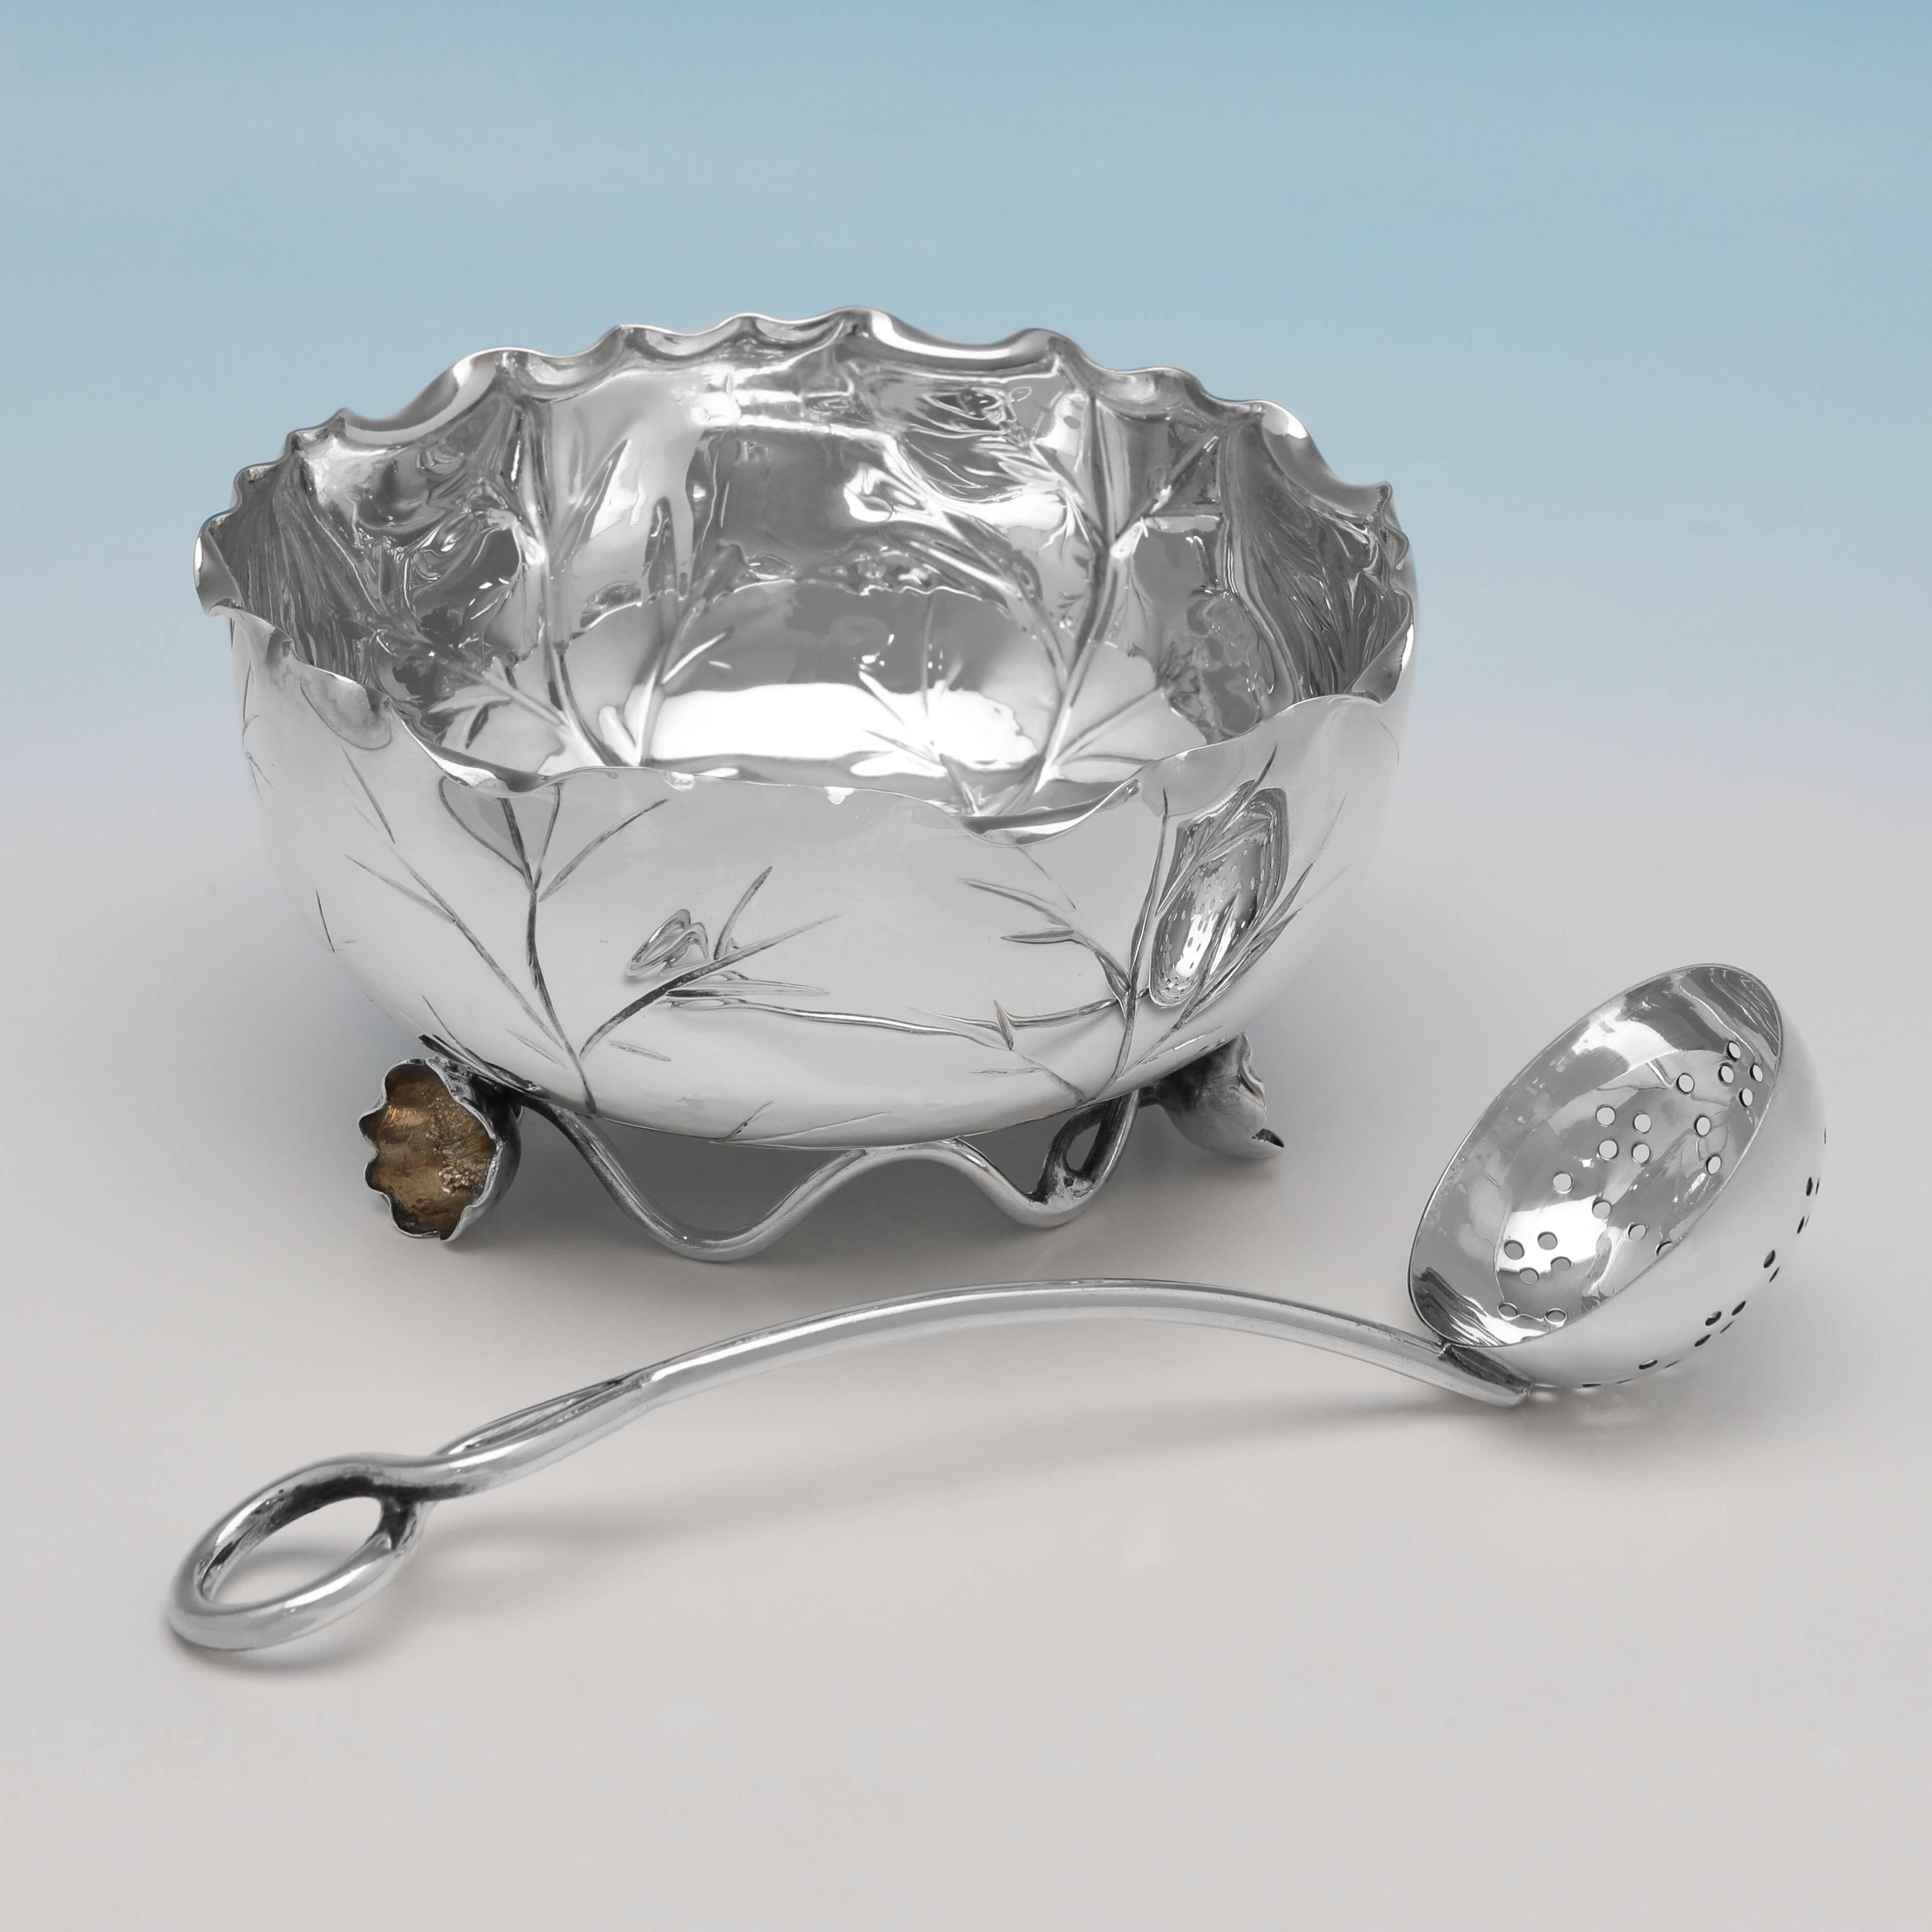 Hallmarked in Birmingham in 1908 by Heath & Middleton, this delightful, Antique Sterling Silver Sugar Bowl & Sifter Spoon, are in the Art Nouveau taste, modelled as a leaf and stranding on flower bud feet. The bowl measures 2